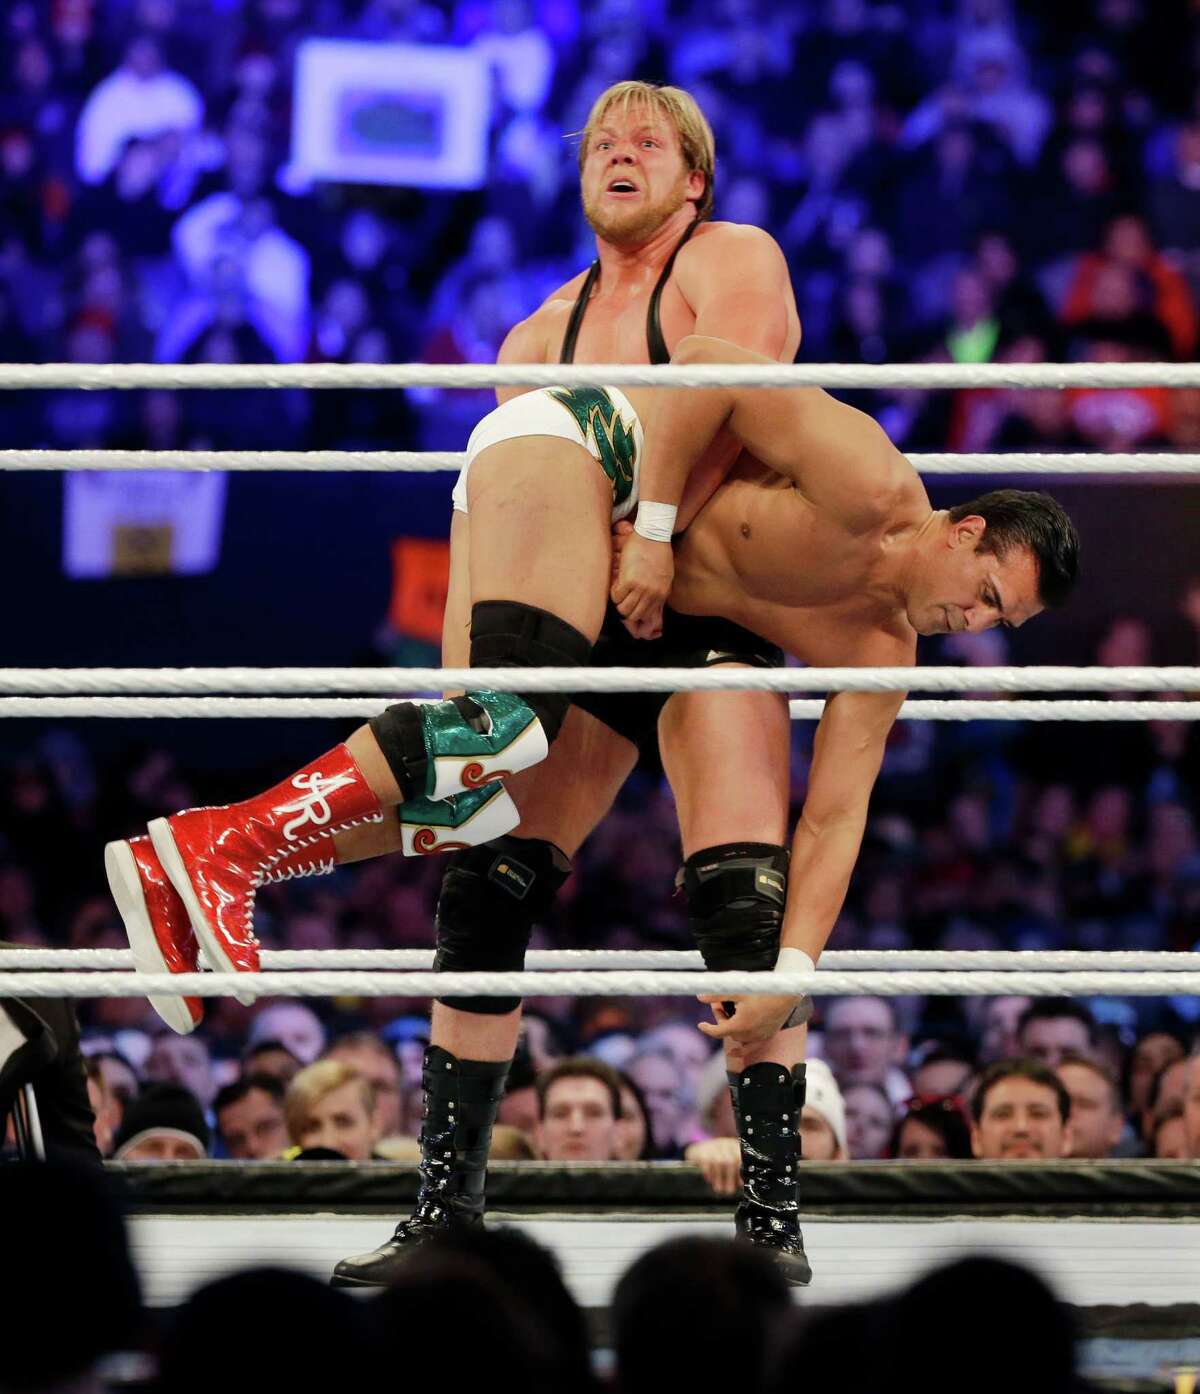 Jacob "Jake" Hager, Jr., known as Jack Swagger, top, lifts Jose Alberto Rodríguez, of Mexico, known as Alberto Del Rio as they wrestle Sunday, April 7, 2013, in East Rutherford, N.J., during the WWE Wrestlemania 29 event. (AP Photo/Mel Evans)